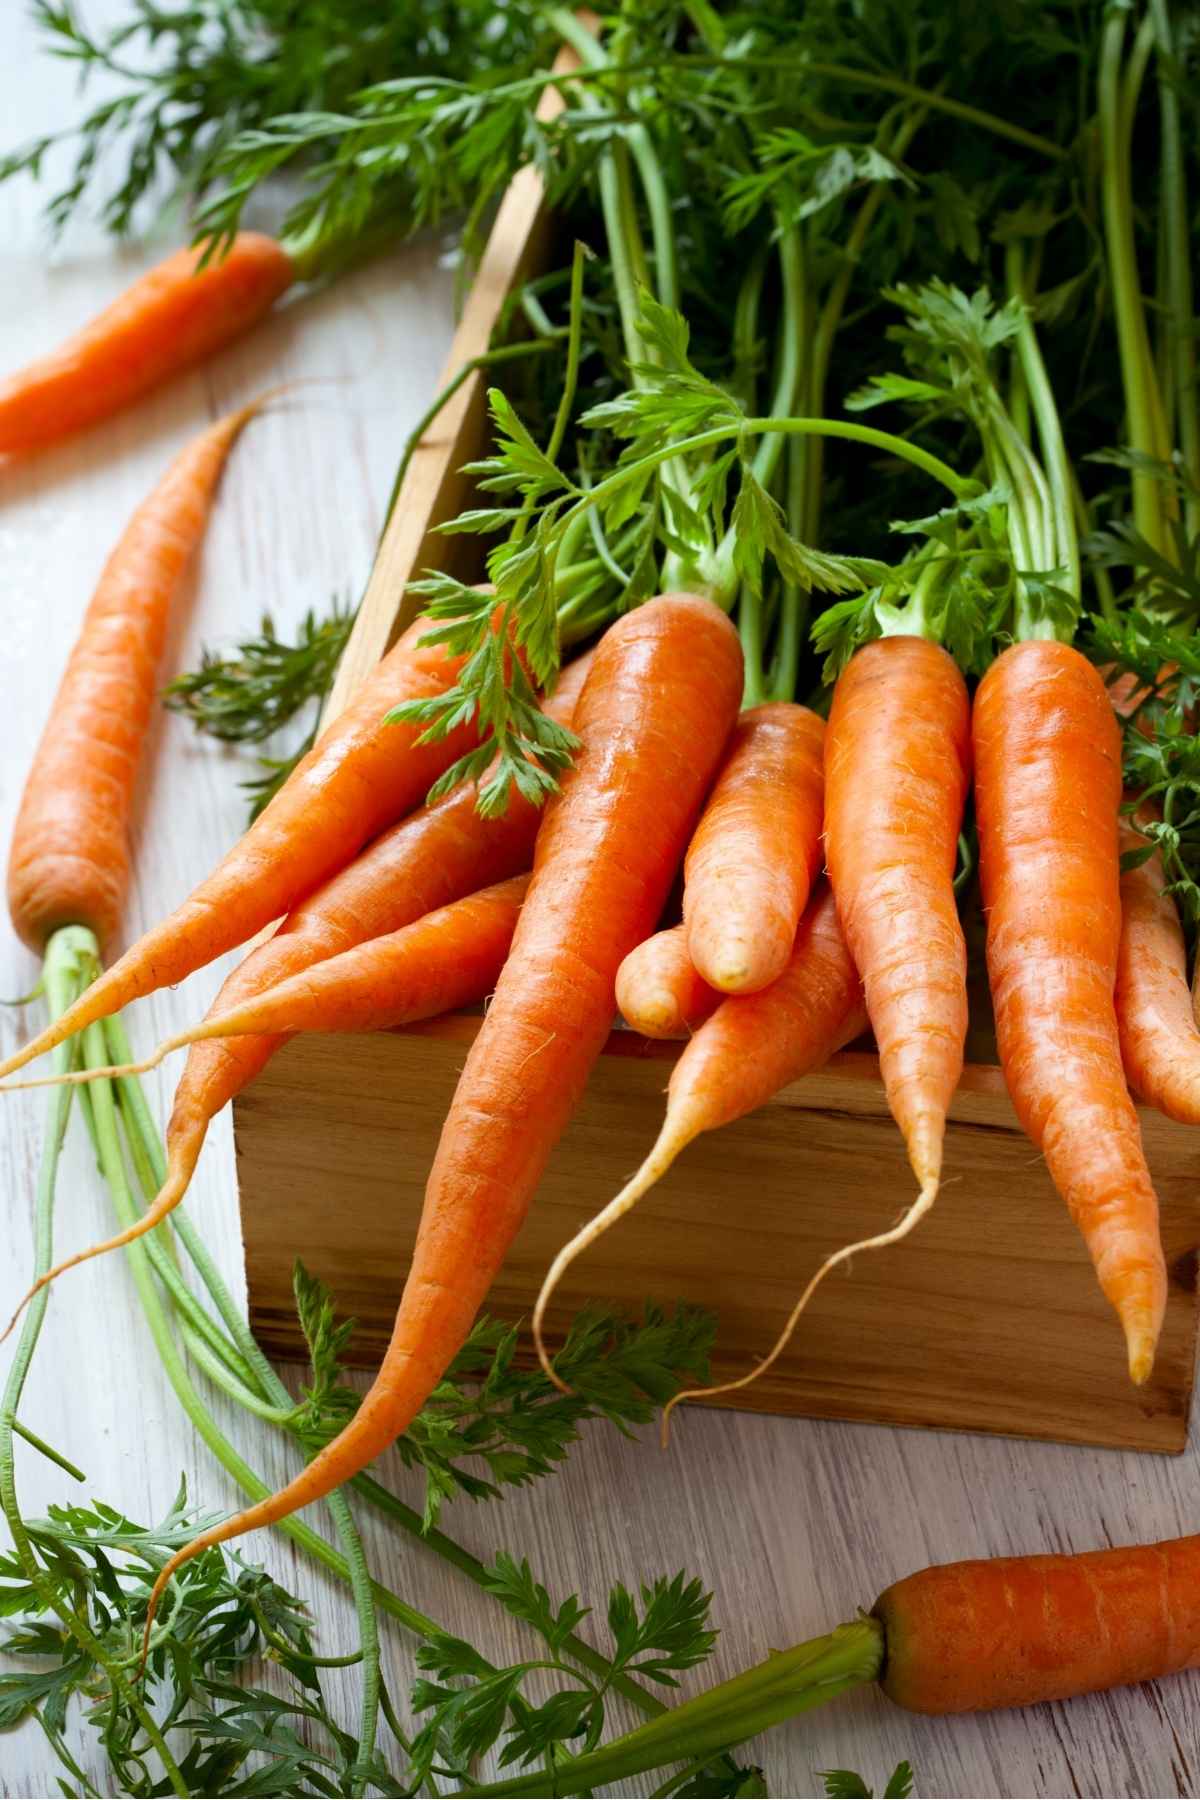 Carrots contain few calories and little fat which is why they are often incorporated into special diets. However, are carrots considered to be keto and how many carbs do they have? Let’s do a deep dive on carrots.